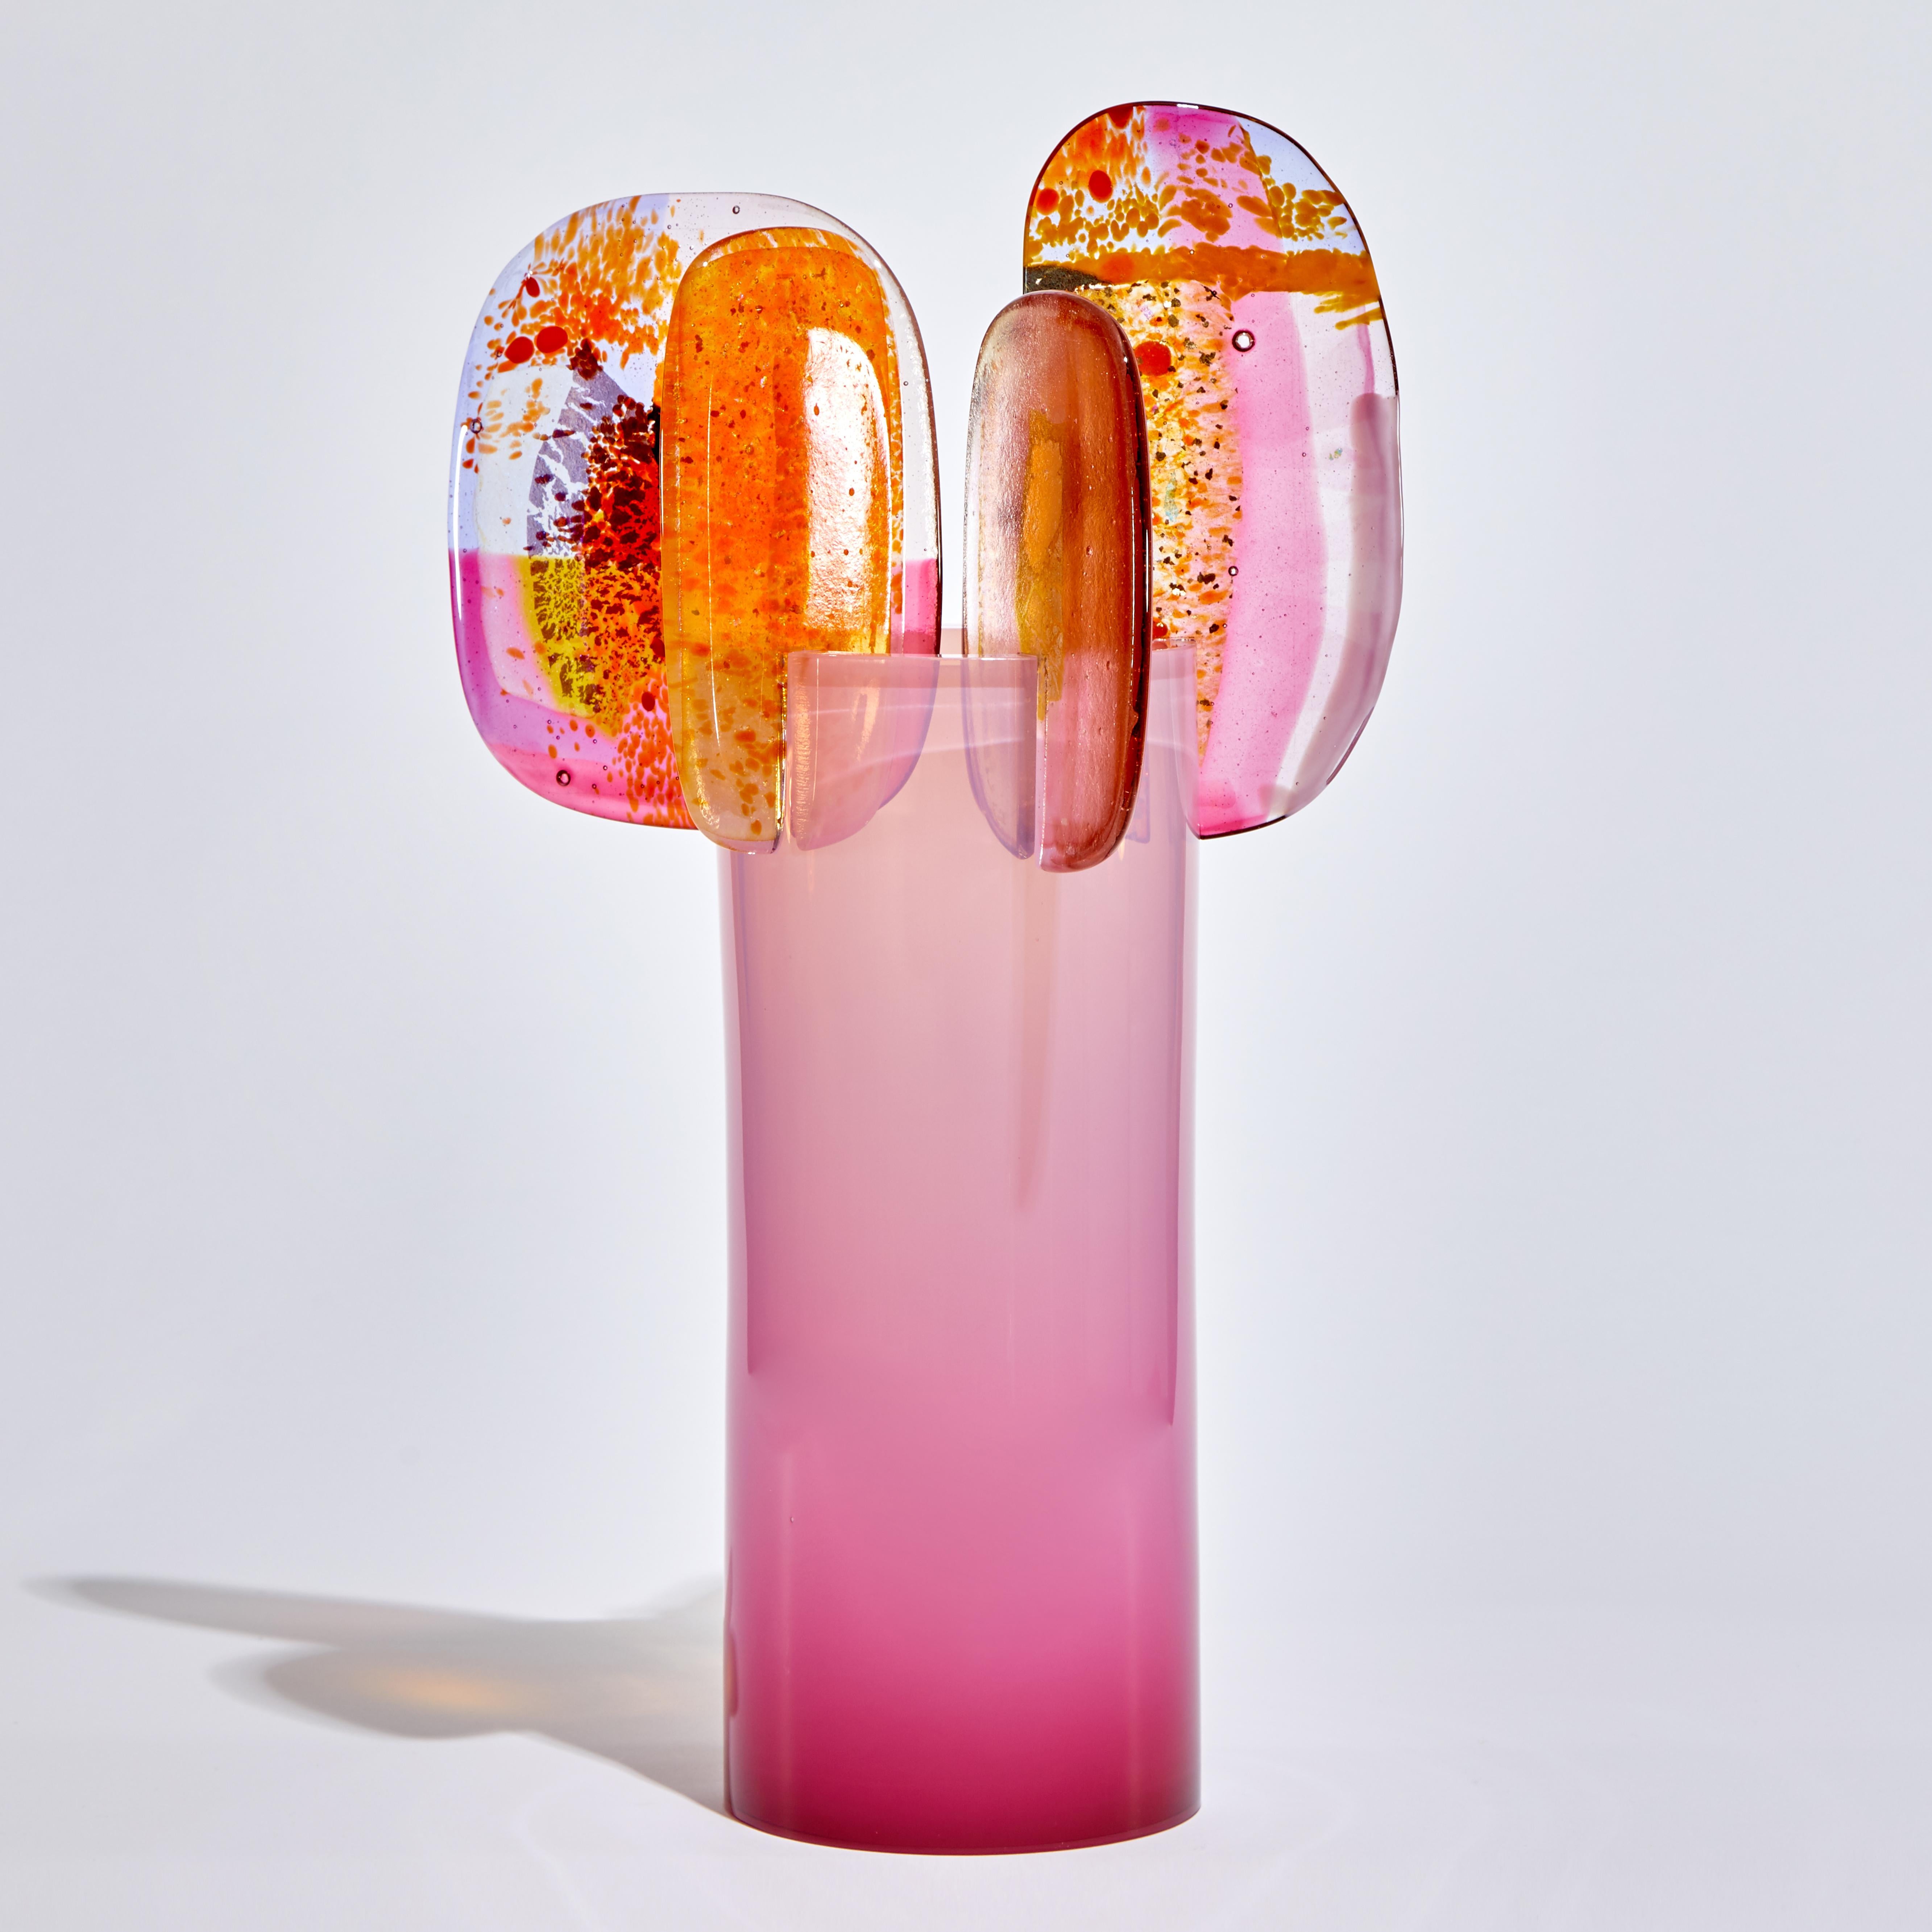 Hand-Crafted Paradise 01 in Pink, a Unique Pink & Orange Glass Sculpture by Amy Cushing